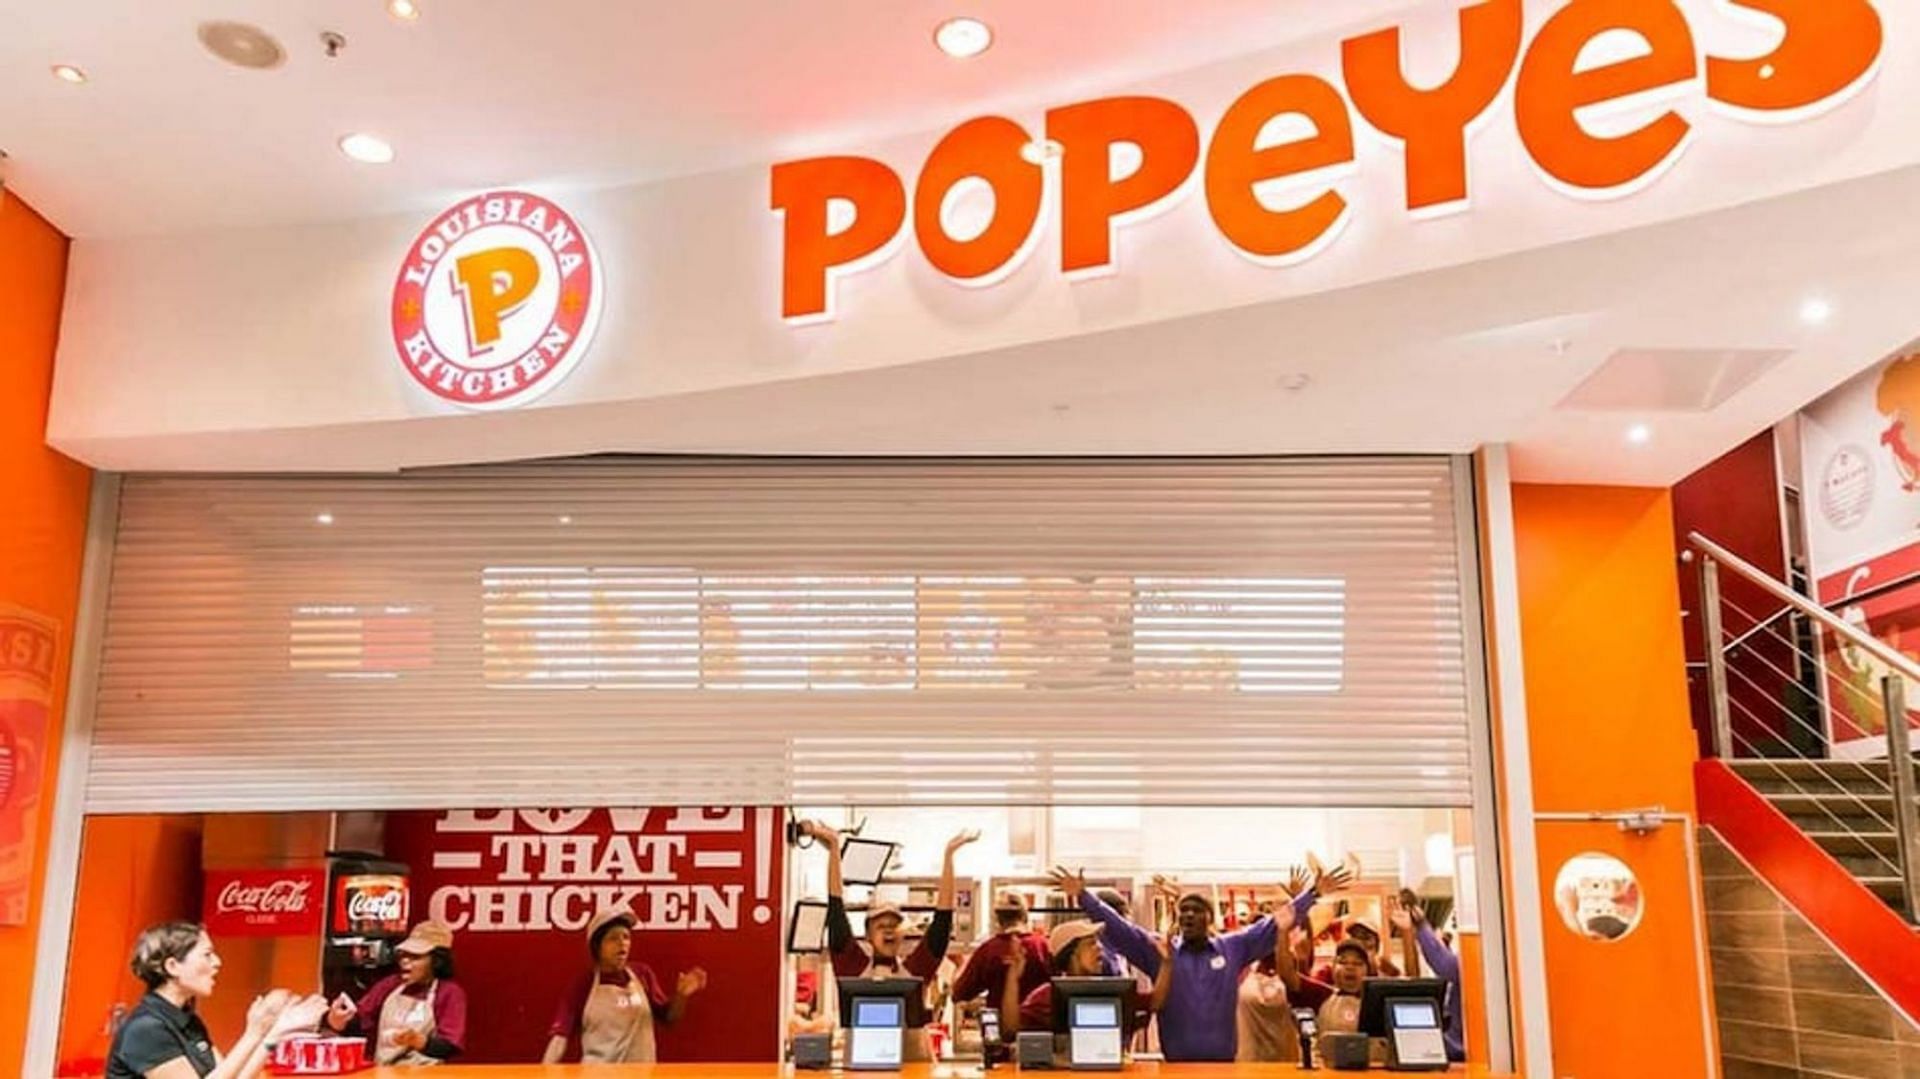 Popeyes offers 59 cents chicken for its 50th anniversary (Image via Shutterstock)